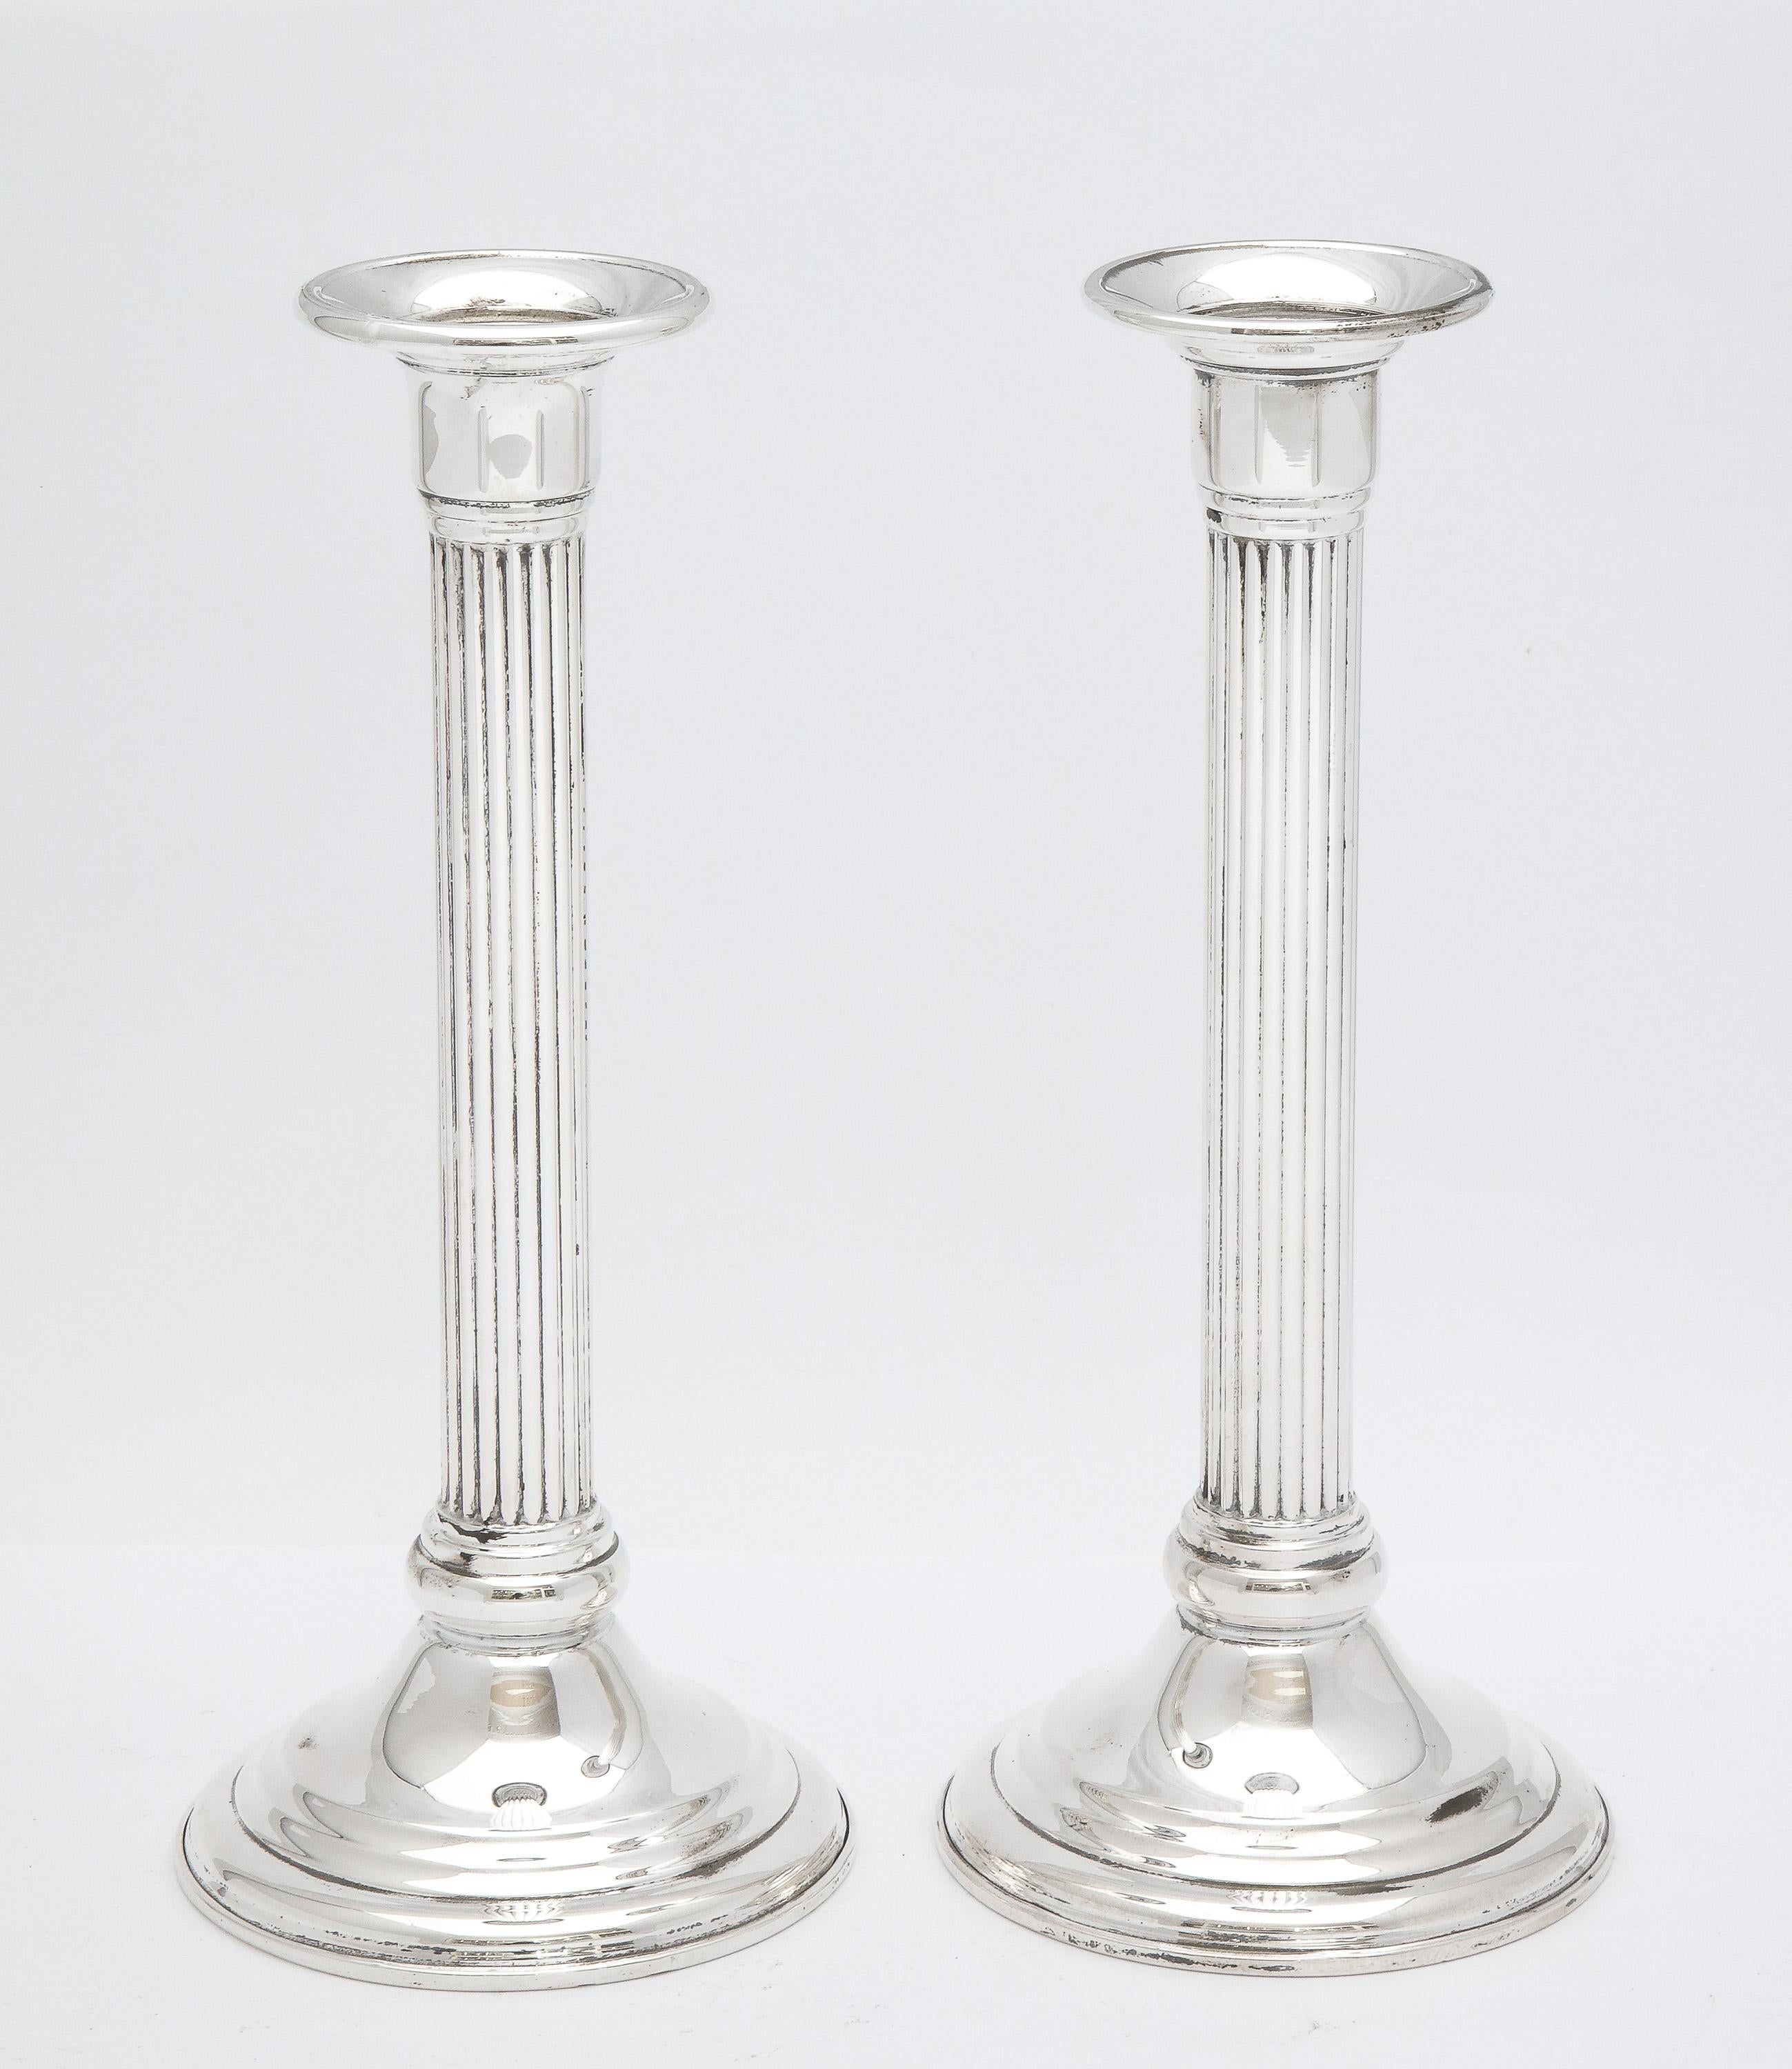 Pair of sterling silver, Neoclassical-style candlesticks, American, Ca, 1950's. Each candlestick measures 8 1/4 inches high x 3 1/2 inches diameter across base. Weighted. Dark areas on sterling silver in photos are reflections. In excellent vintage